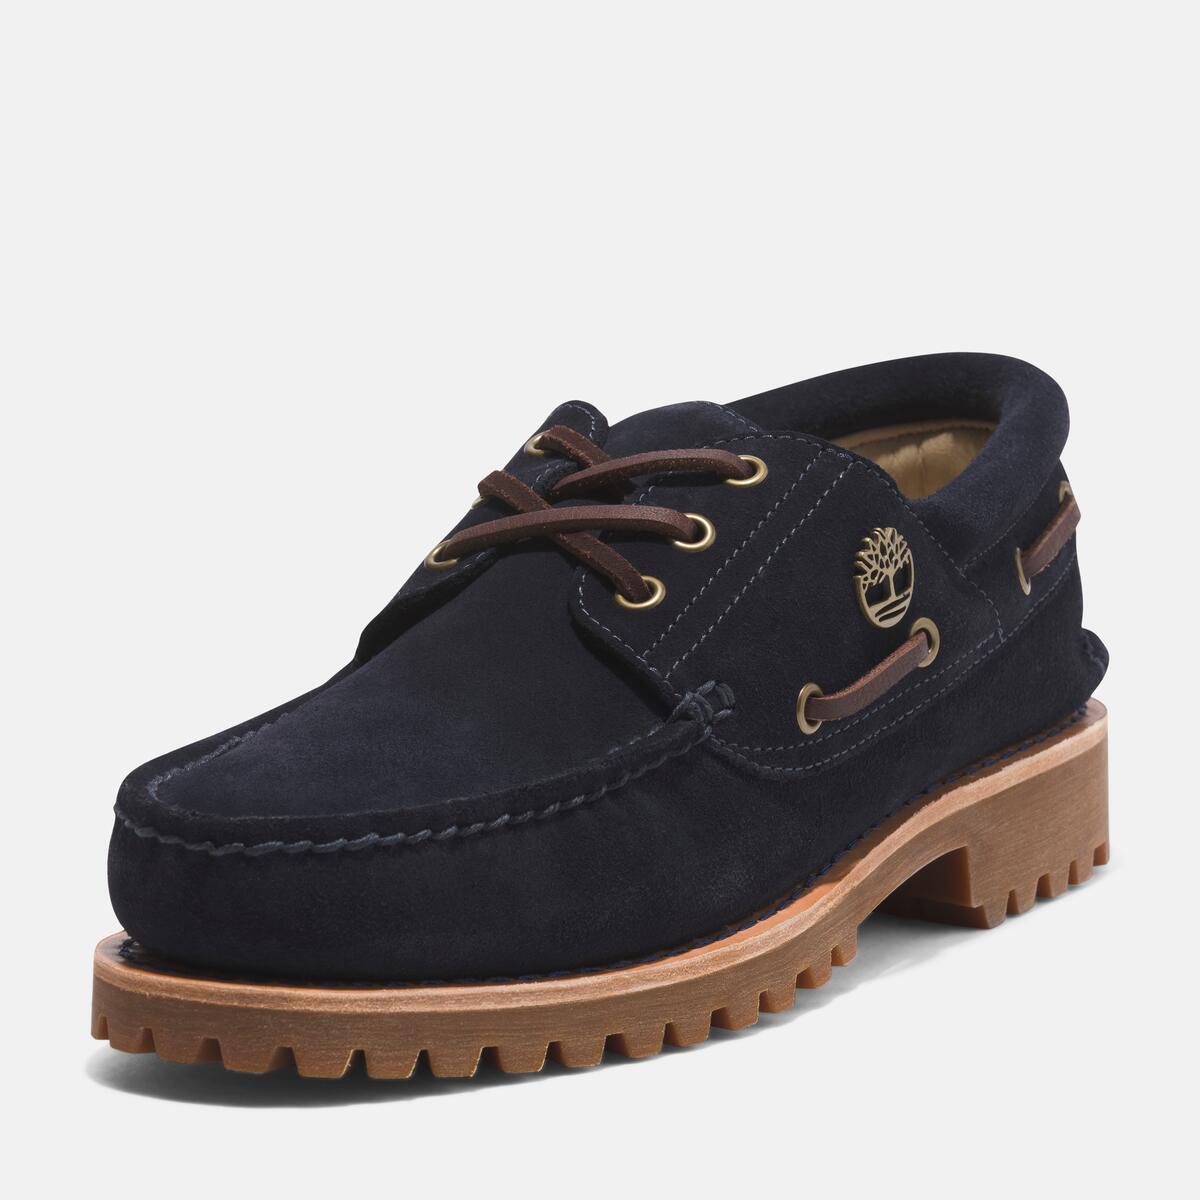 MEN’S TIMBERLAND® AUTHENTIC HANDSEWN BOAT SHOE - Timberland - Singapore